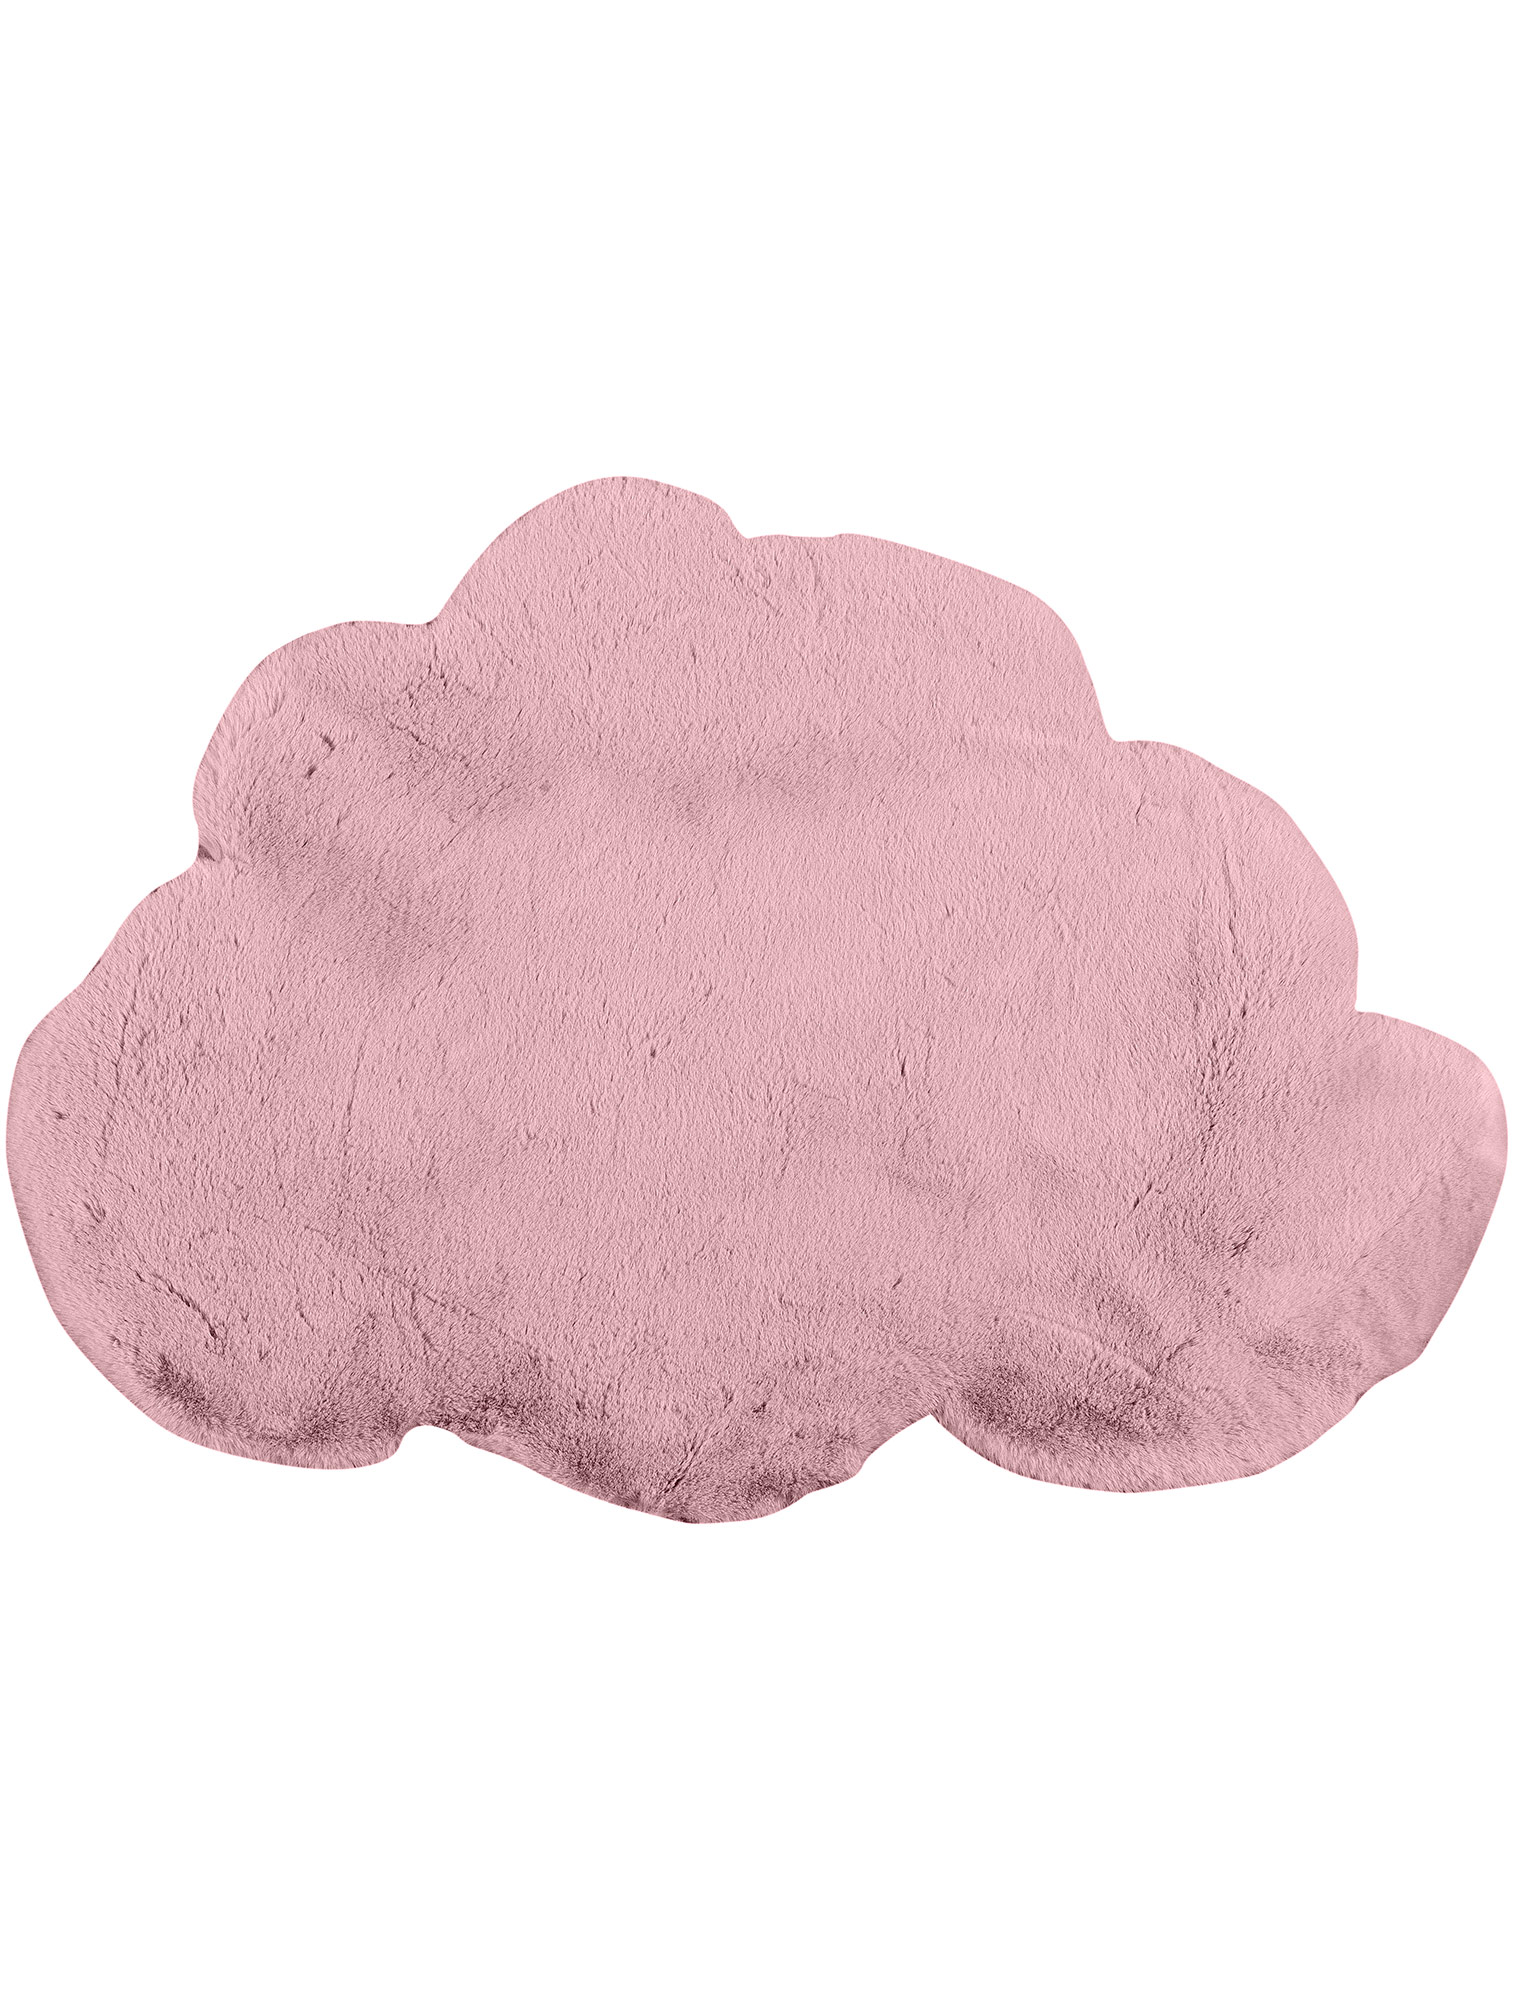 FUZZY-PINK-CLOUD